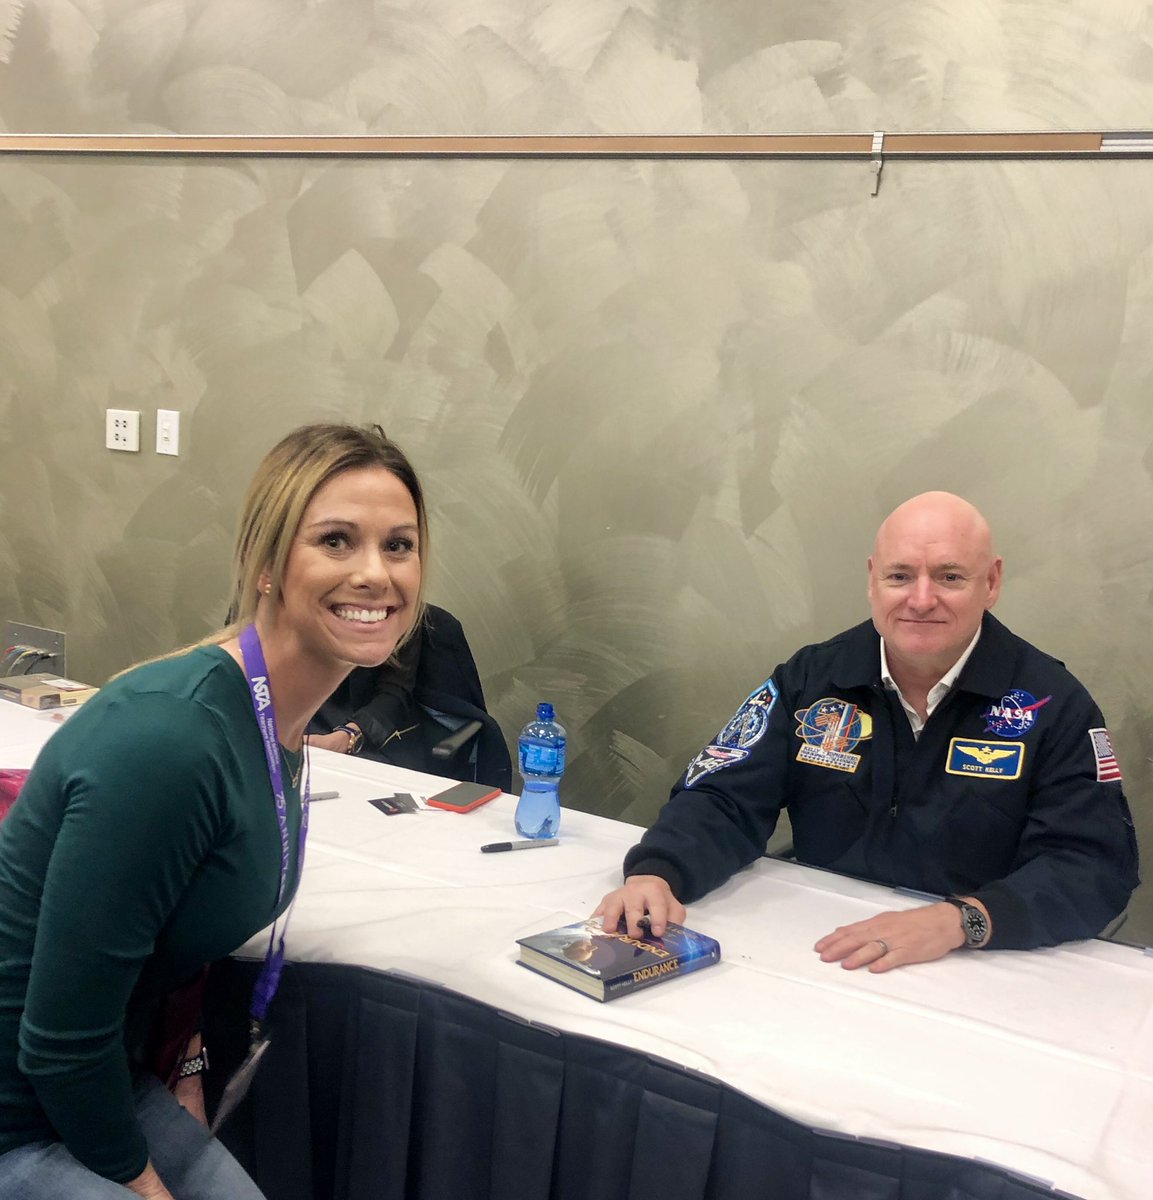 First time I have ever listened intently and hung on every word during a presentation!  #NASA #ScottKelly #StarStruck #BestPresentation #NSTA2019 @BernardMiddle @NSTA @NASA @NASAedu